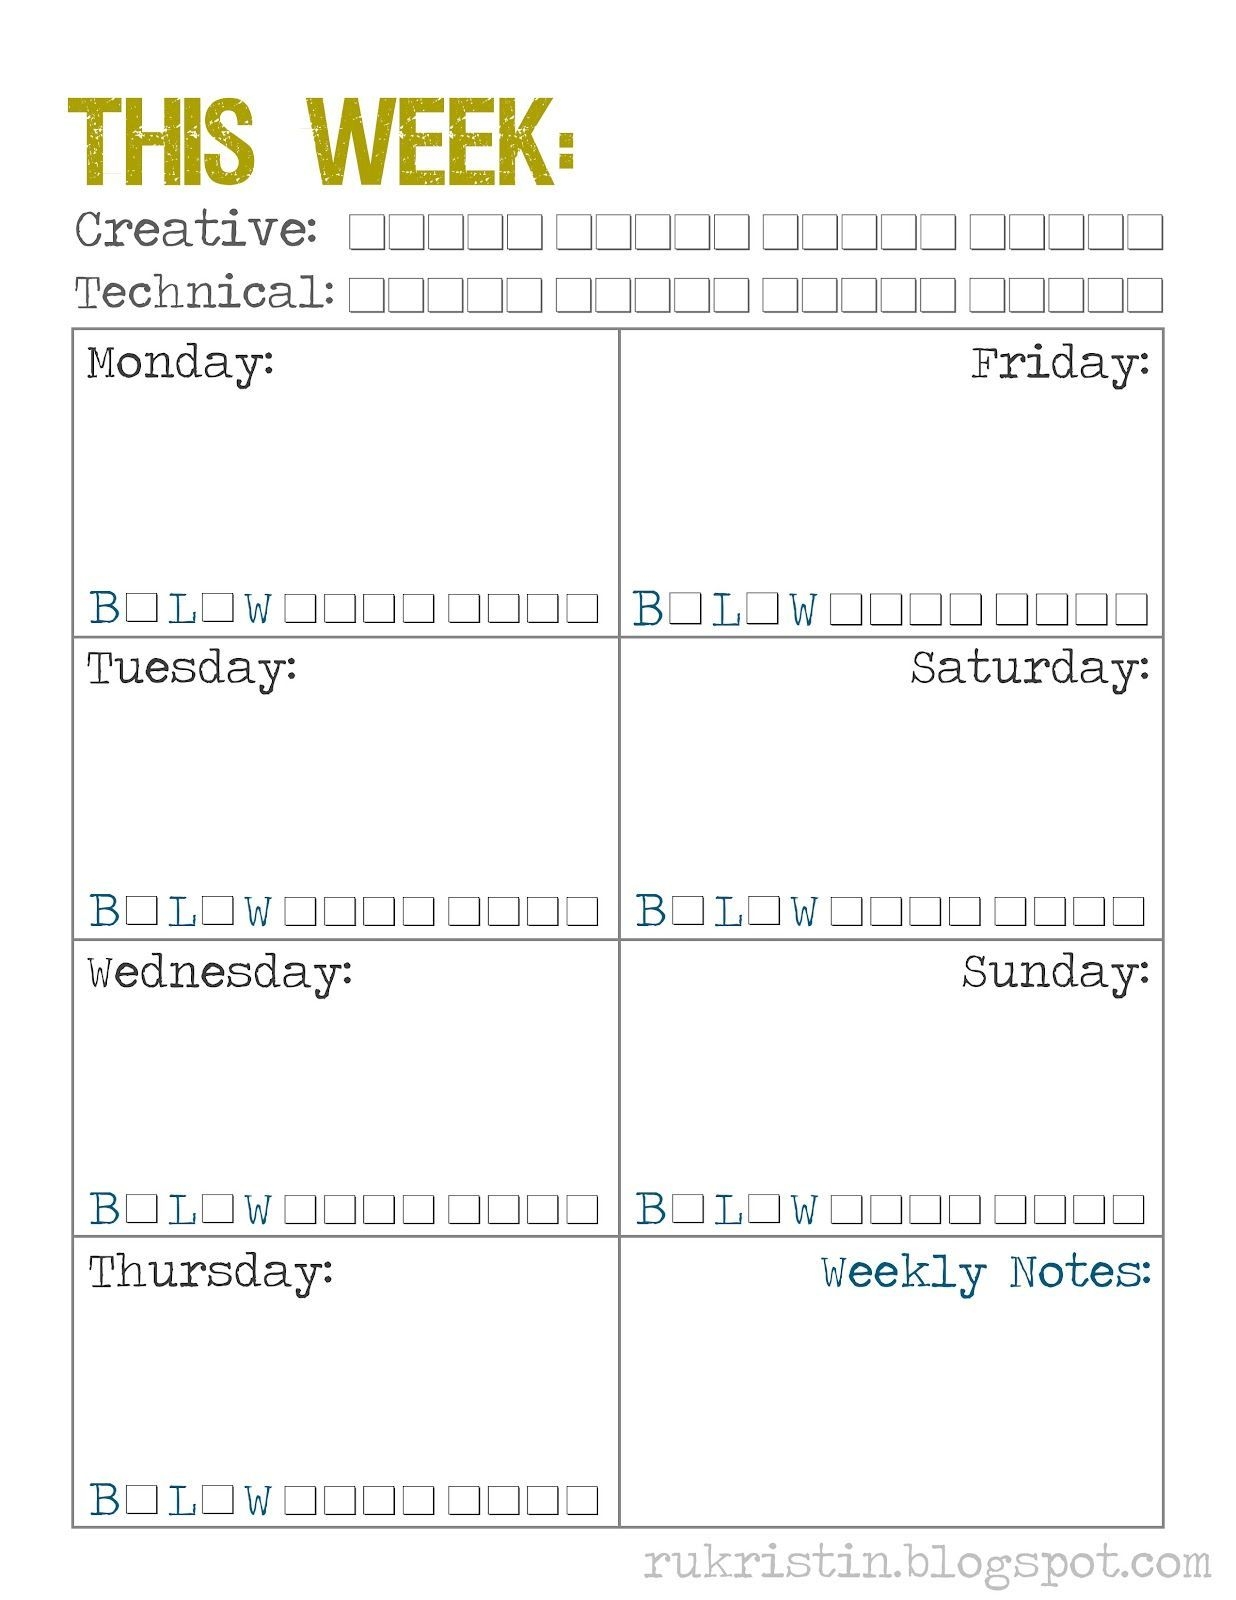 Rukristin Papercrafts: Weekly Calendar Template | Weekly